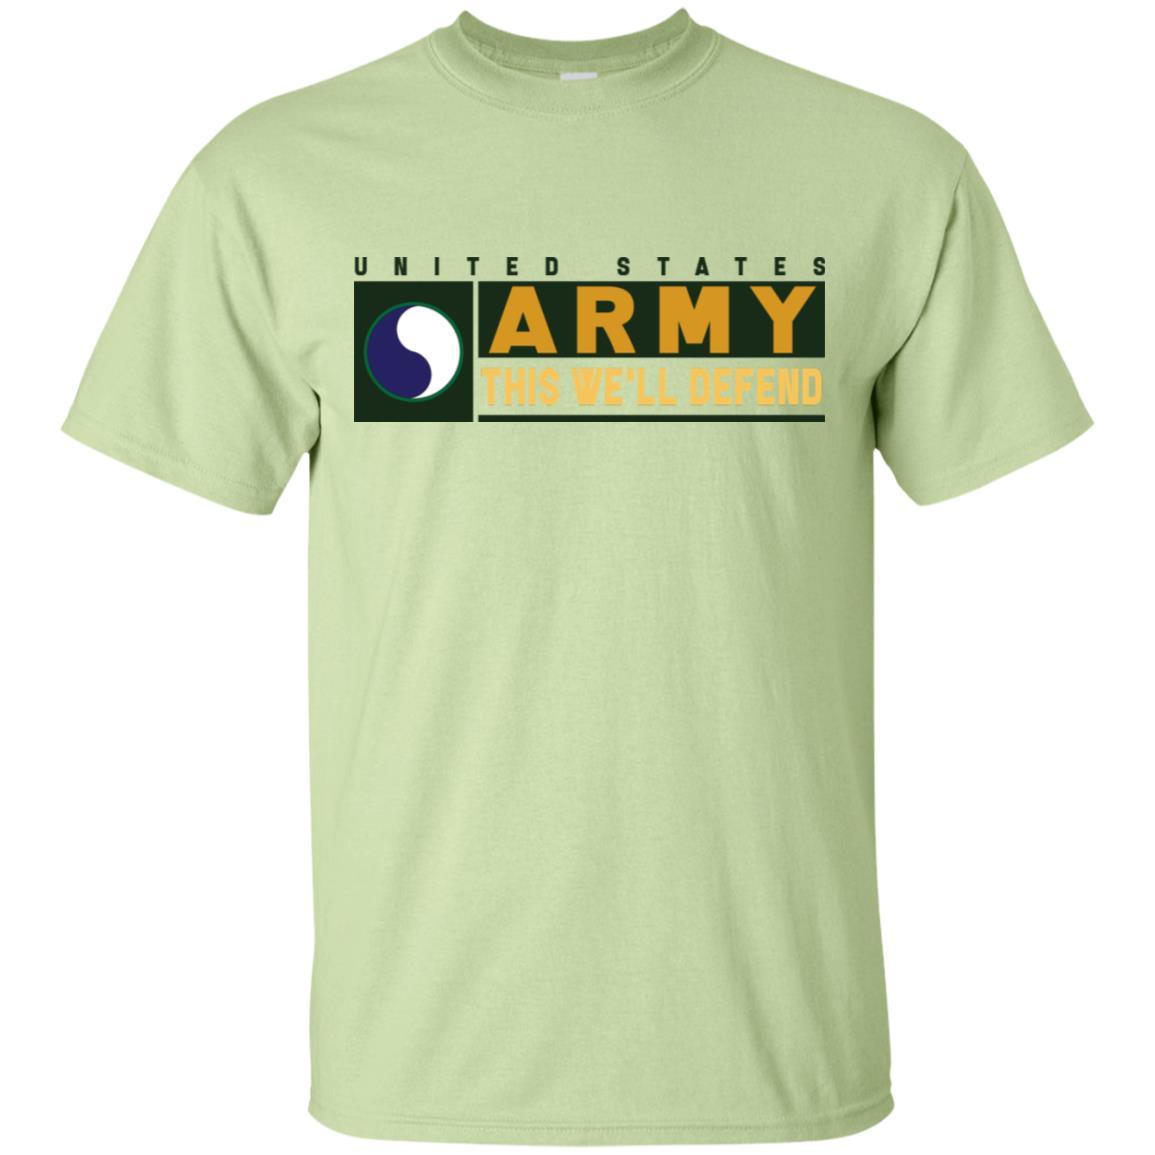 US Army 29TH INFANTRY DIVISION CSIB- This We'll Defend T-Shirt On Front For Men-TShirt-Army-Veterans Nation